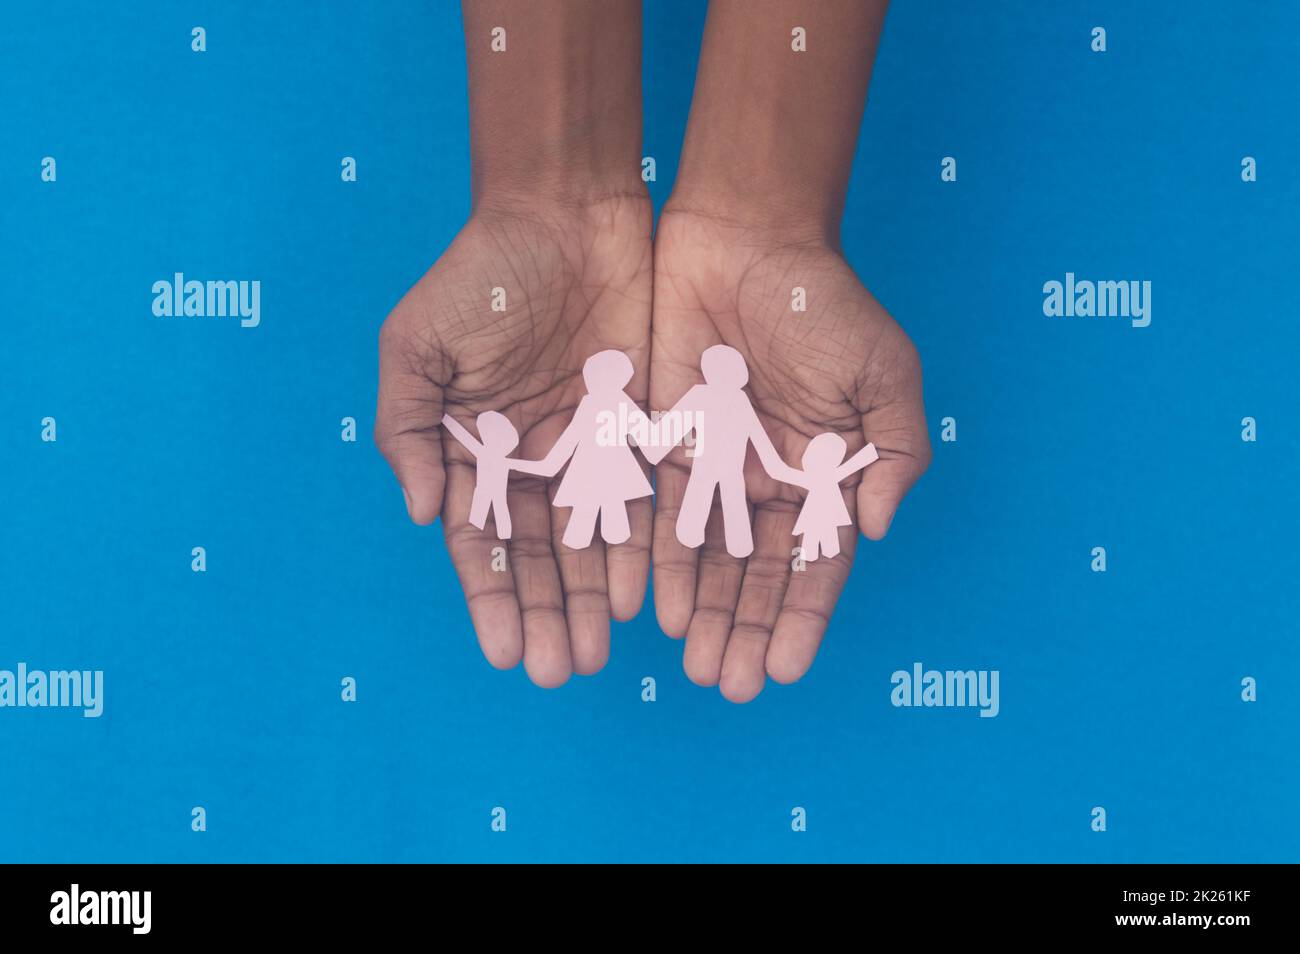 Hand holding family figure cutout top view. World health day Protection against domestic violence, healthcare and medical background. Foster care, homeless support and social distancing concept. Stock Photo